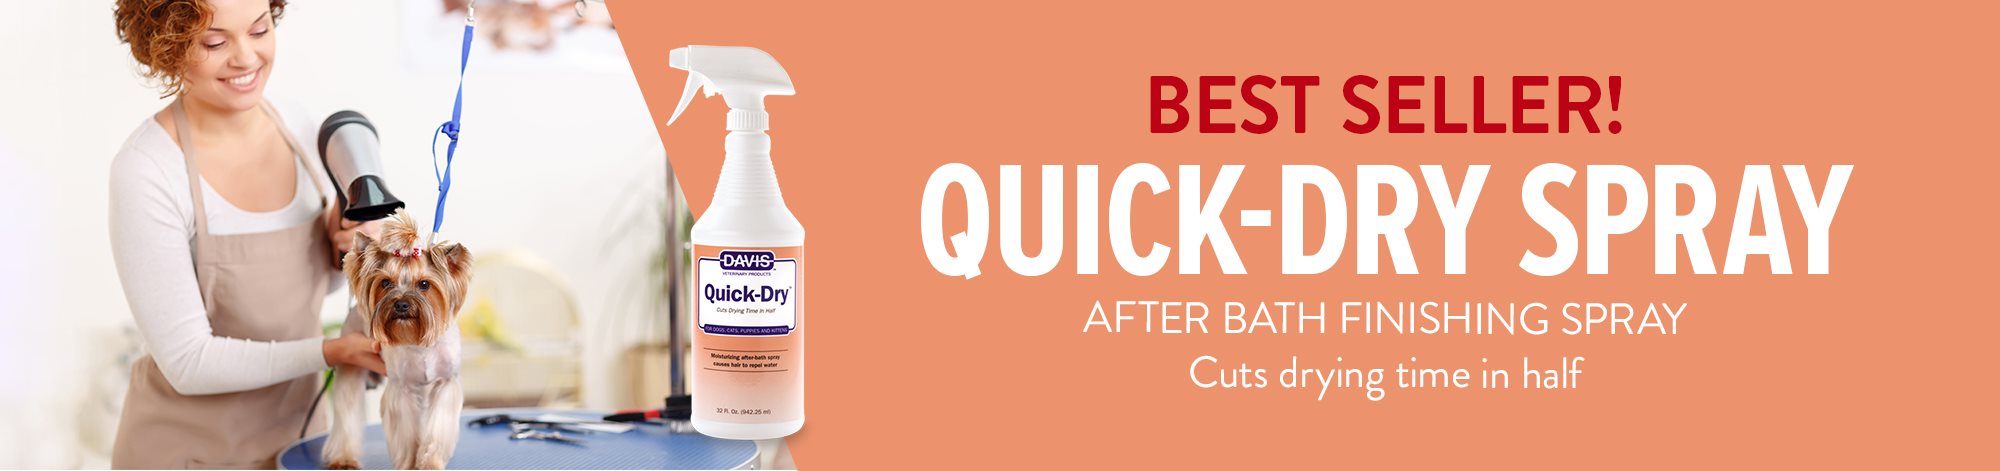 Our best seller, Quick Dry Spray cuts drying time in half!